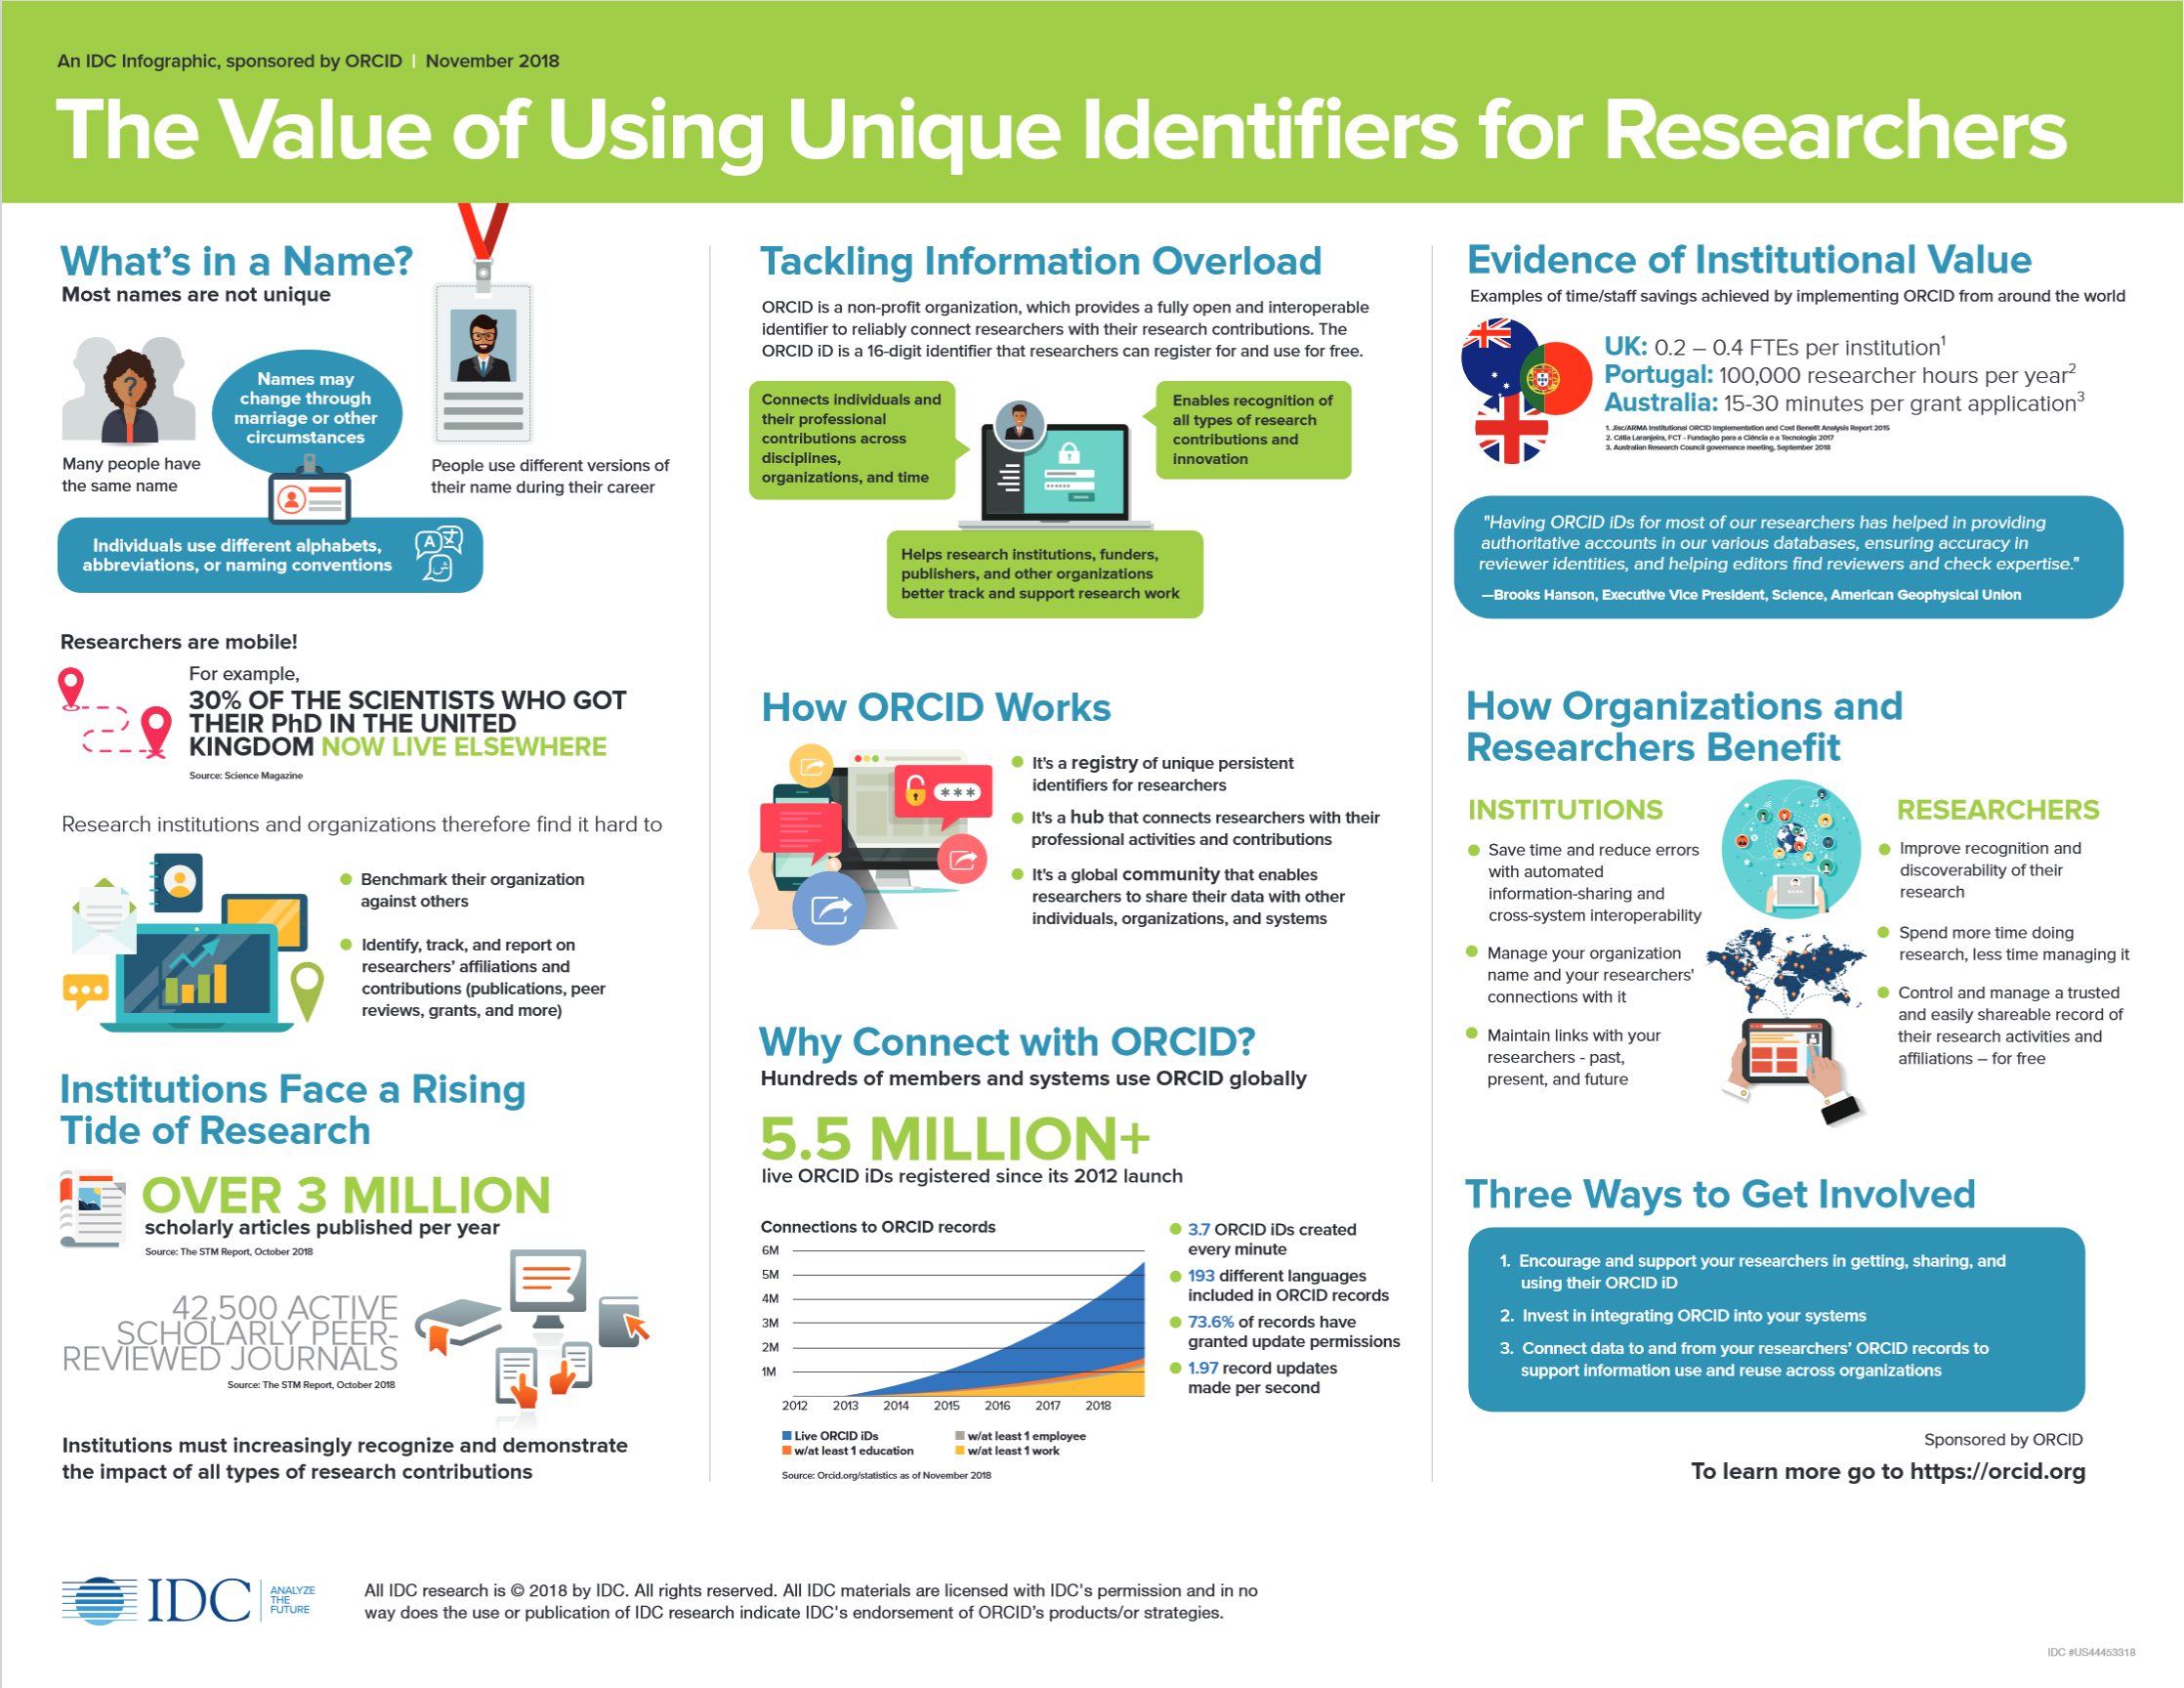 The Value of Using Unique Identifiers for Researchers